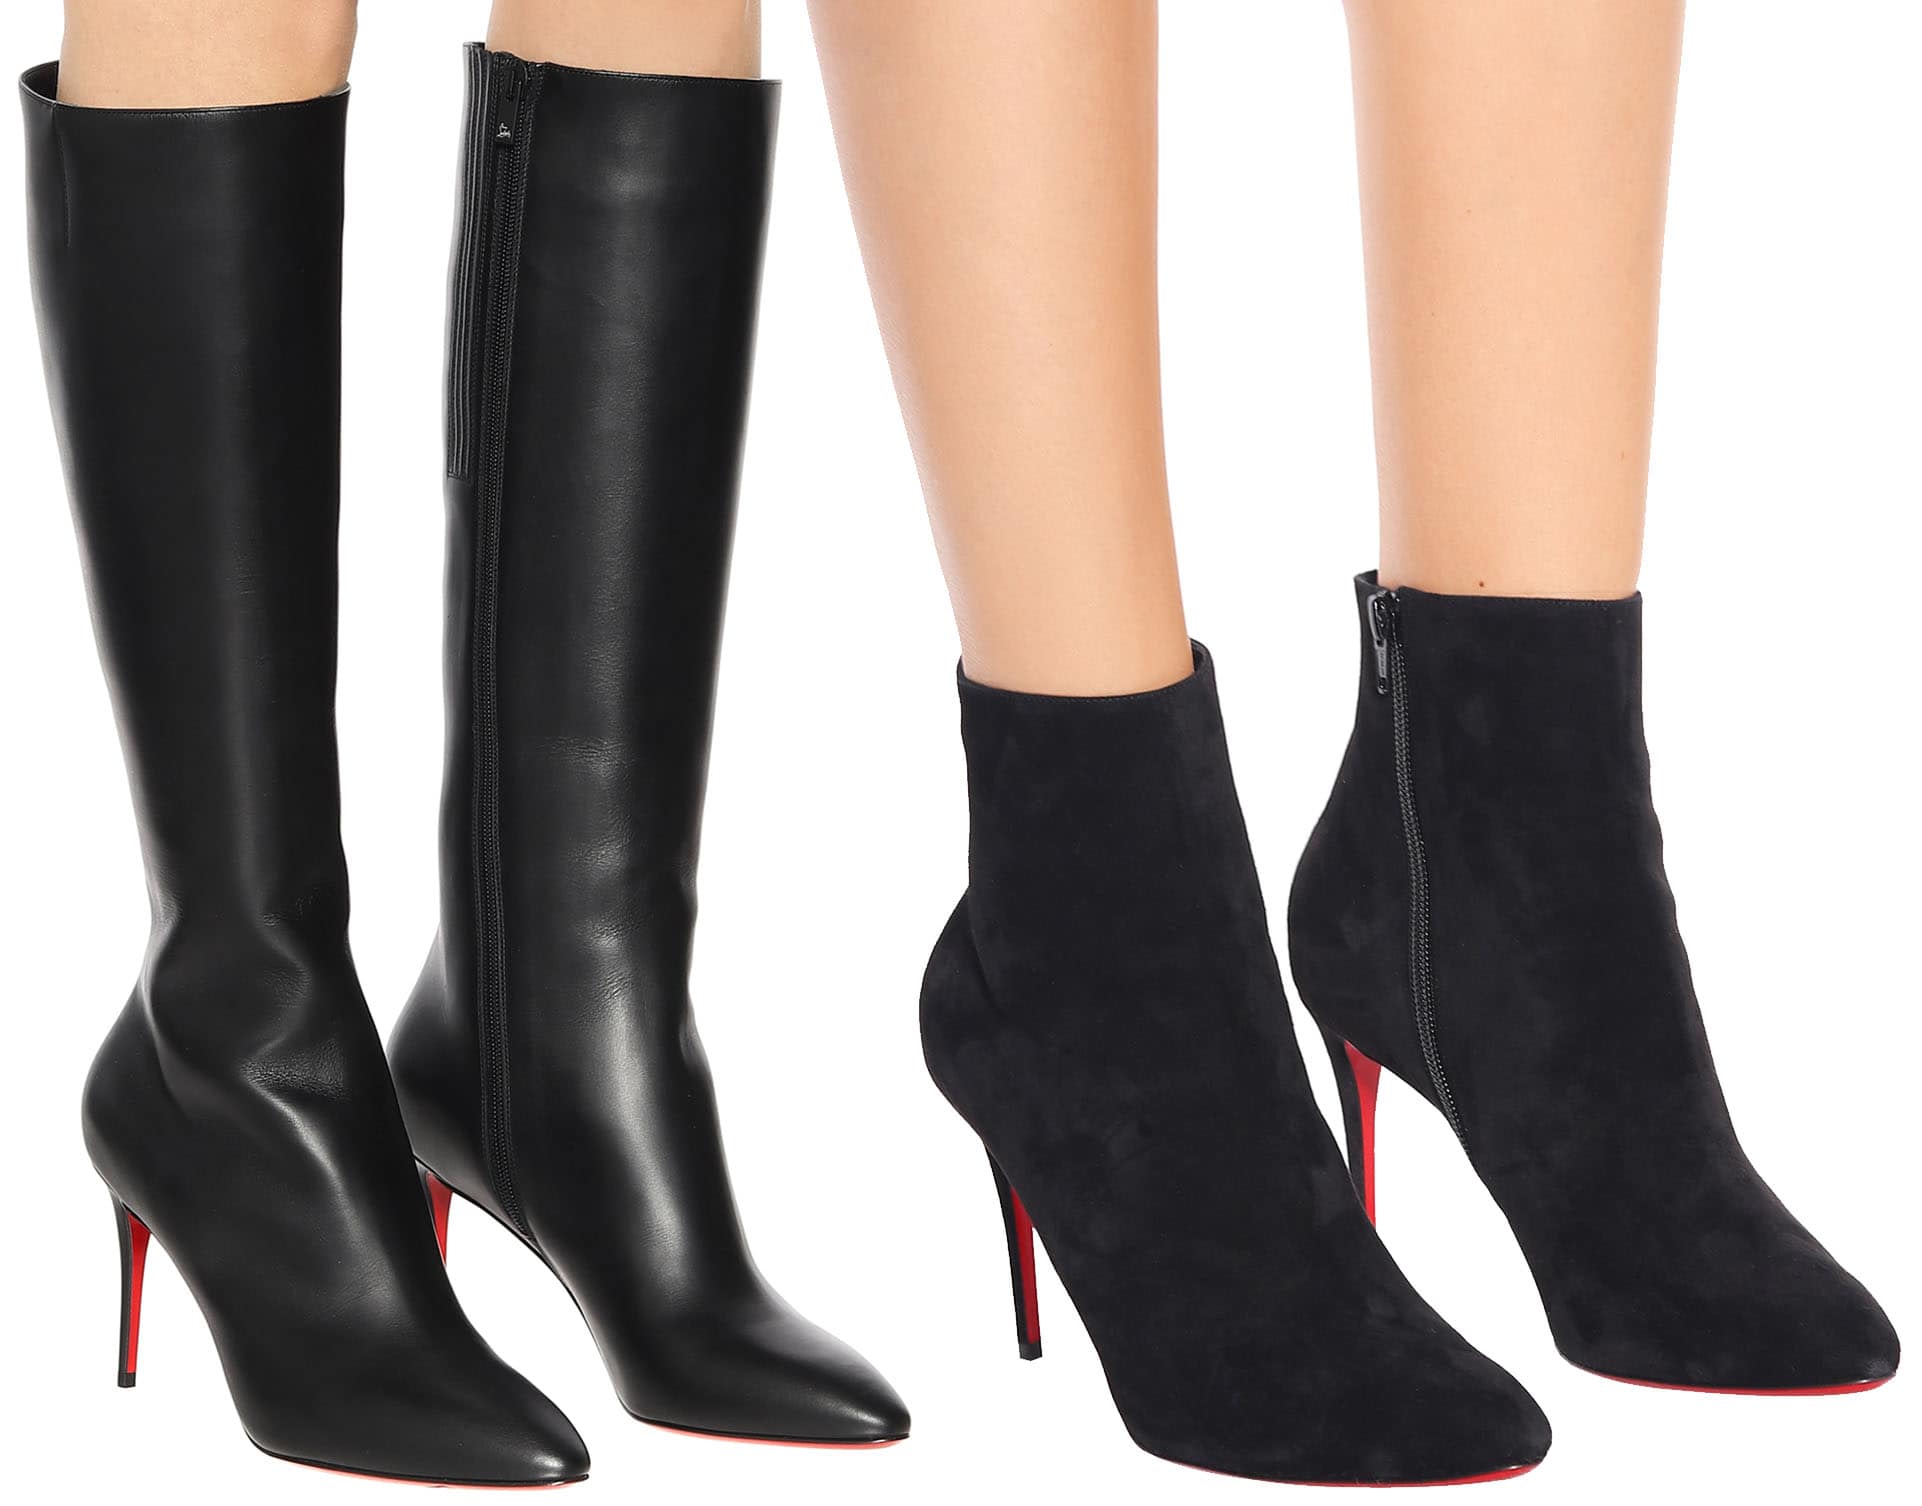 Christian Louboutin's Eloise boot is just as popular as the classic pump silhouette with the same 85mm heels